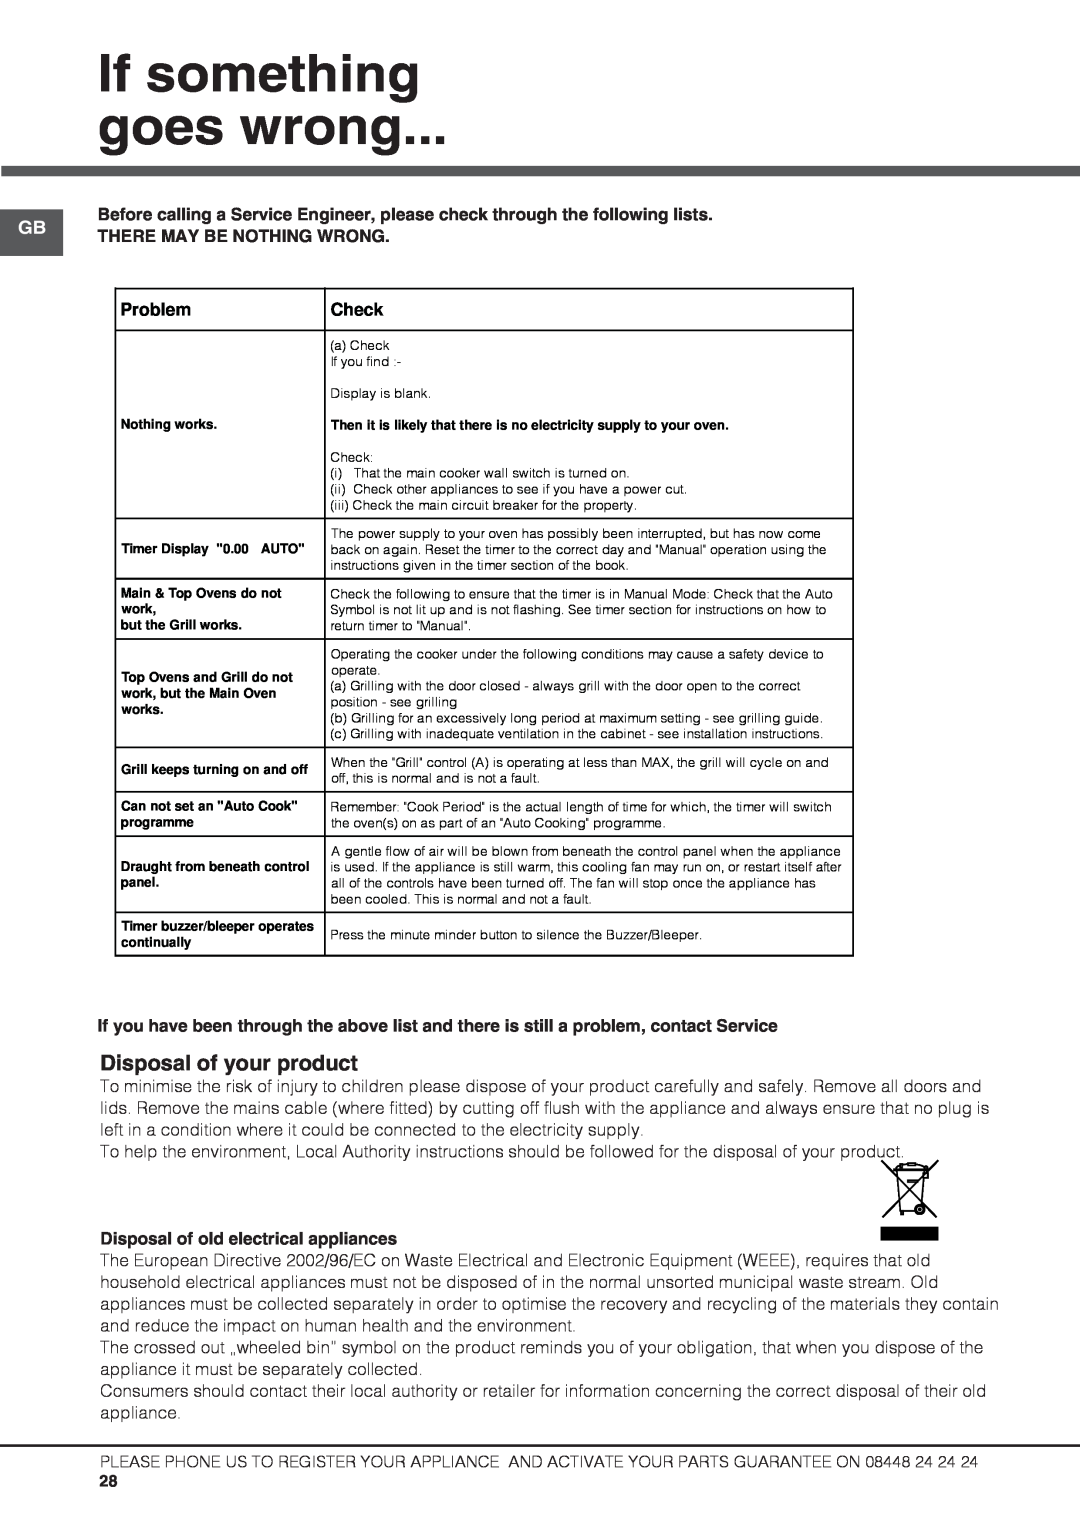 Hotpoint UBS 537 CX S manual If something, goes wrong, Disposal of your product, There May Be Nothing Wrong, Problem, Check 